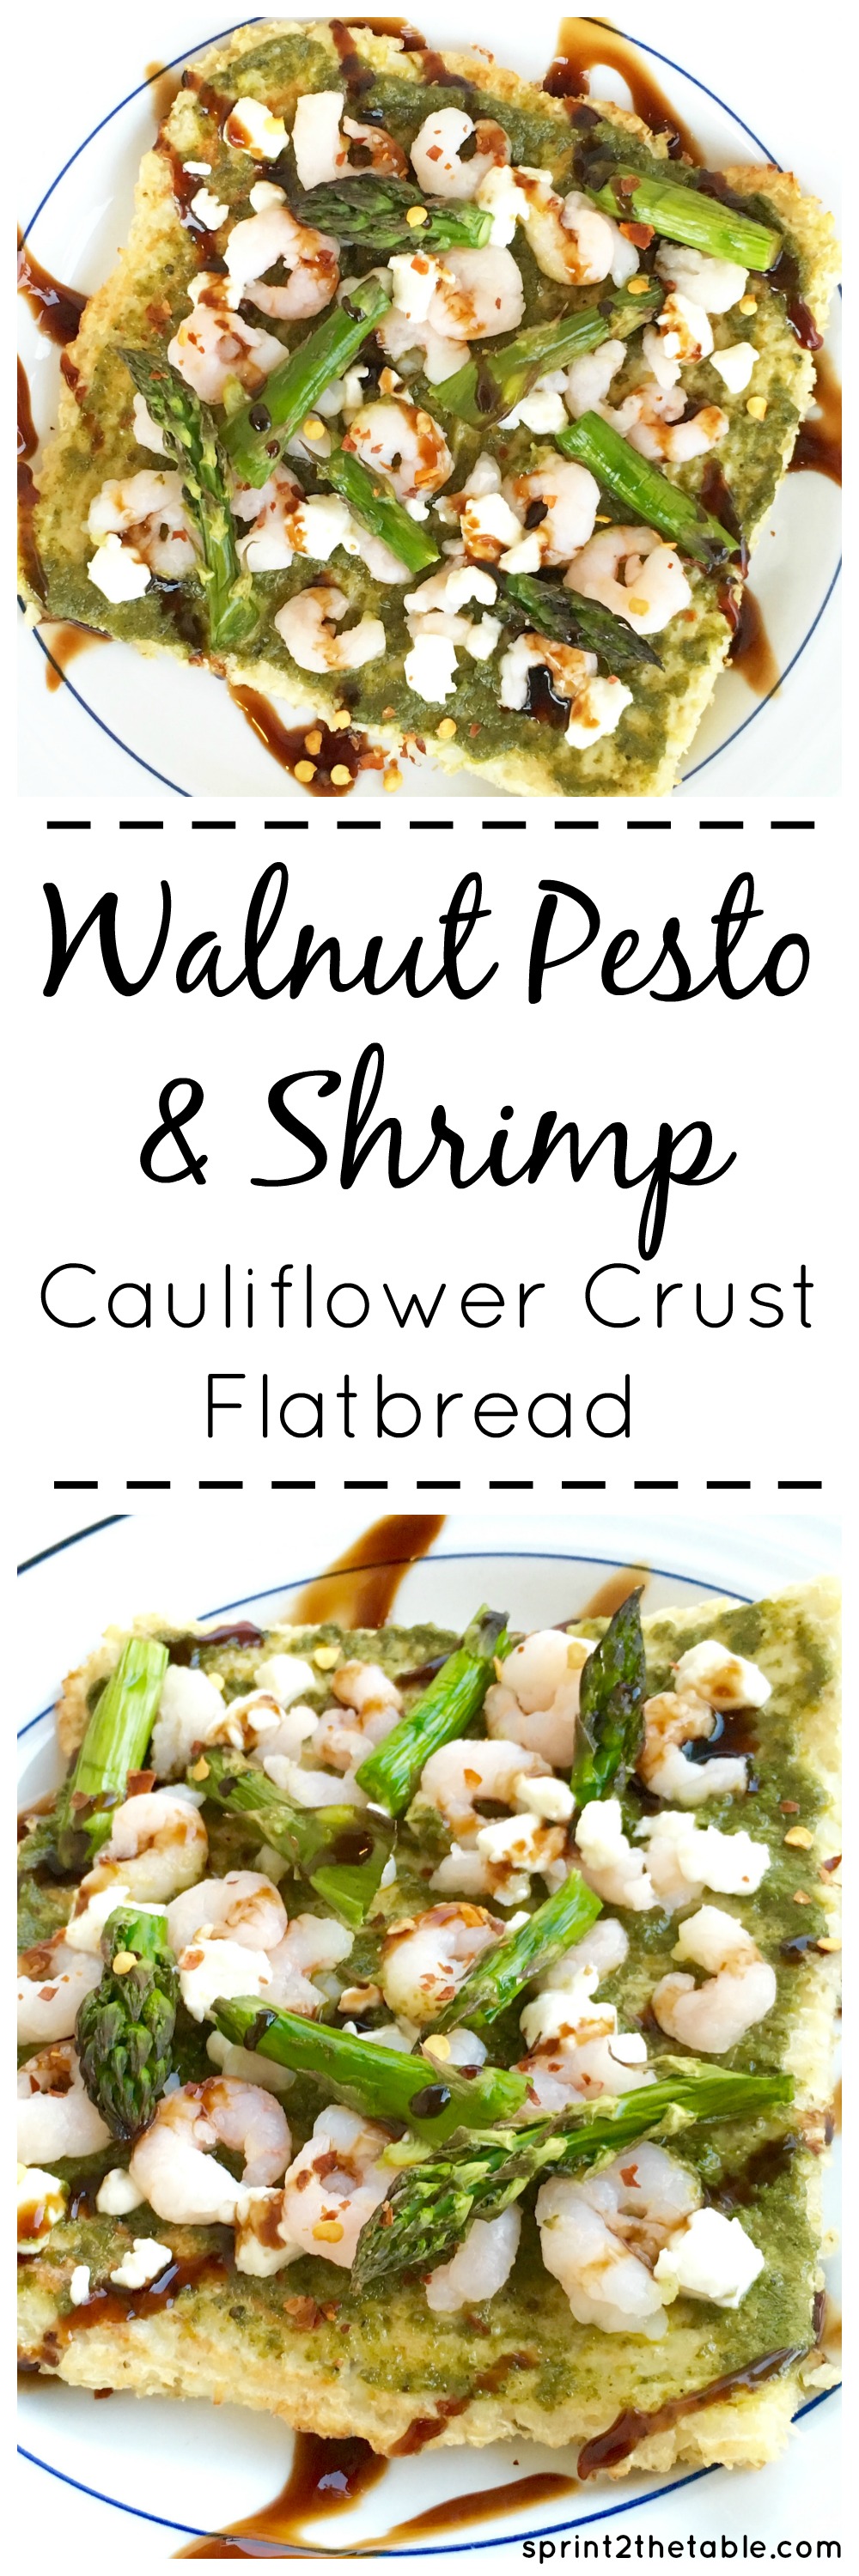 Walnut Pesto & Shrimp Cauliflower Crust Flatbread - if you're a pizza-lover, you have to try this healthy, dairy-free twist on crust!